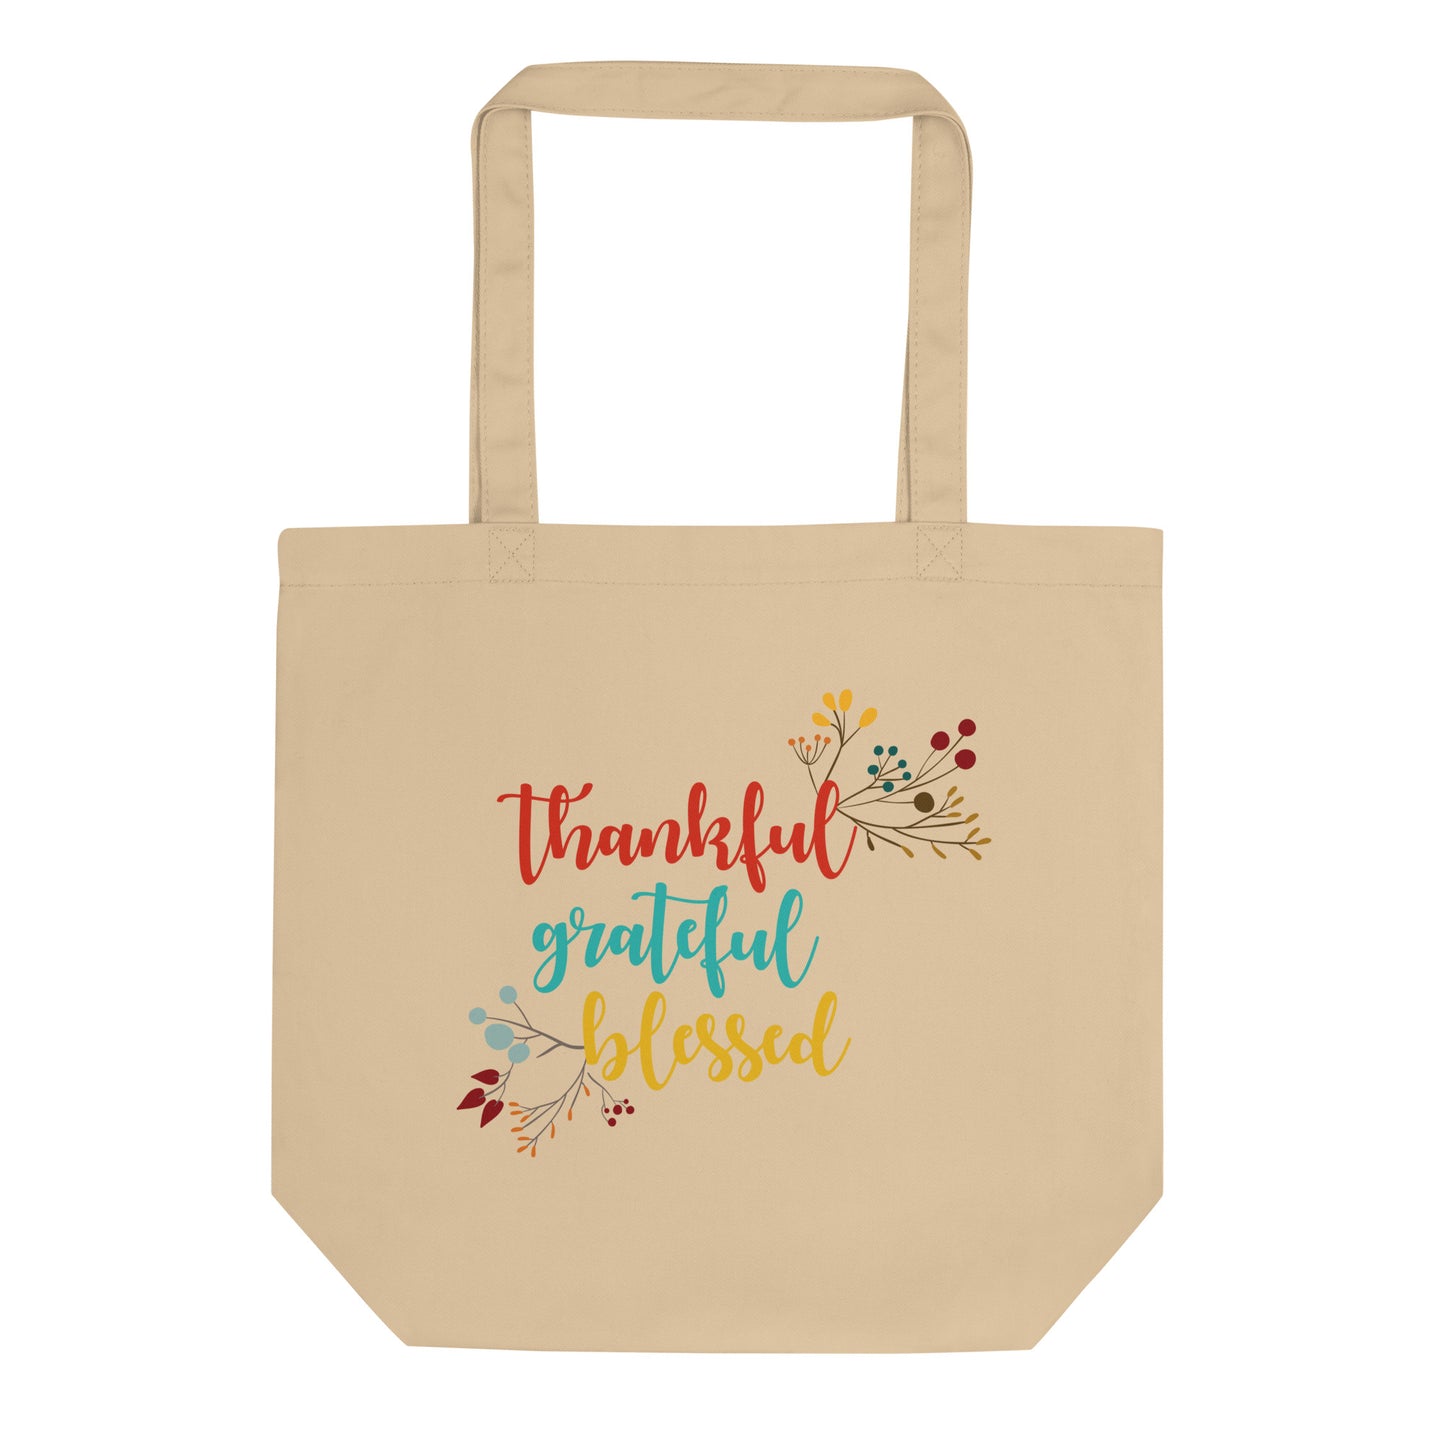 Thankful Grateful Blessed Eco Tote Bag